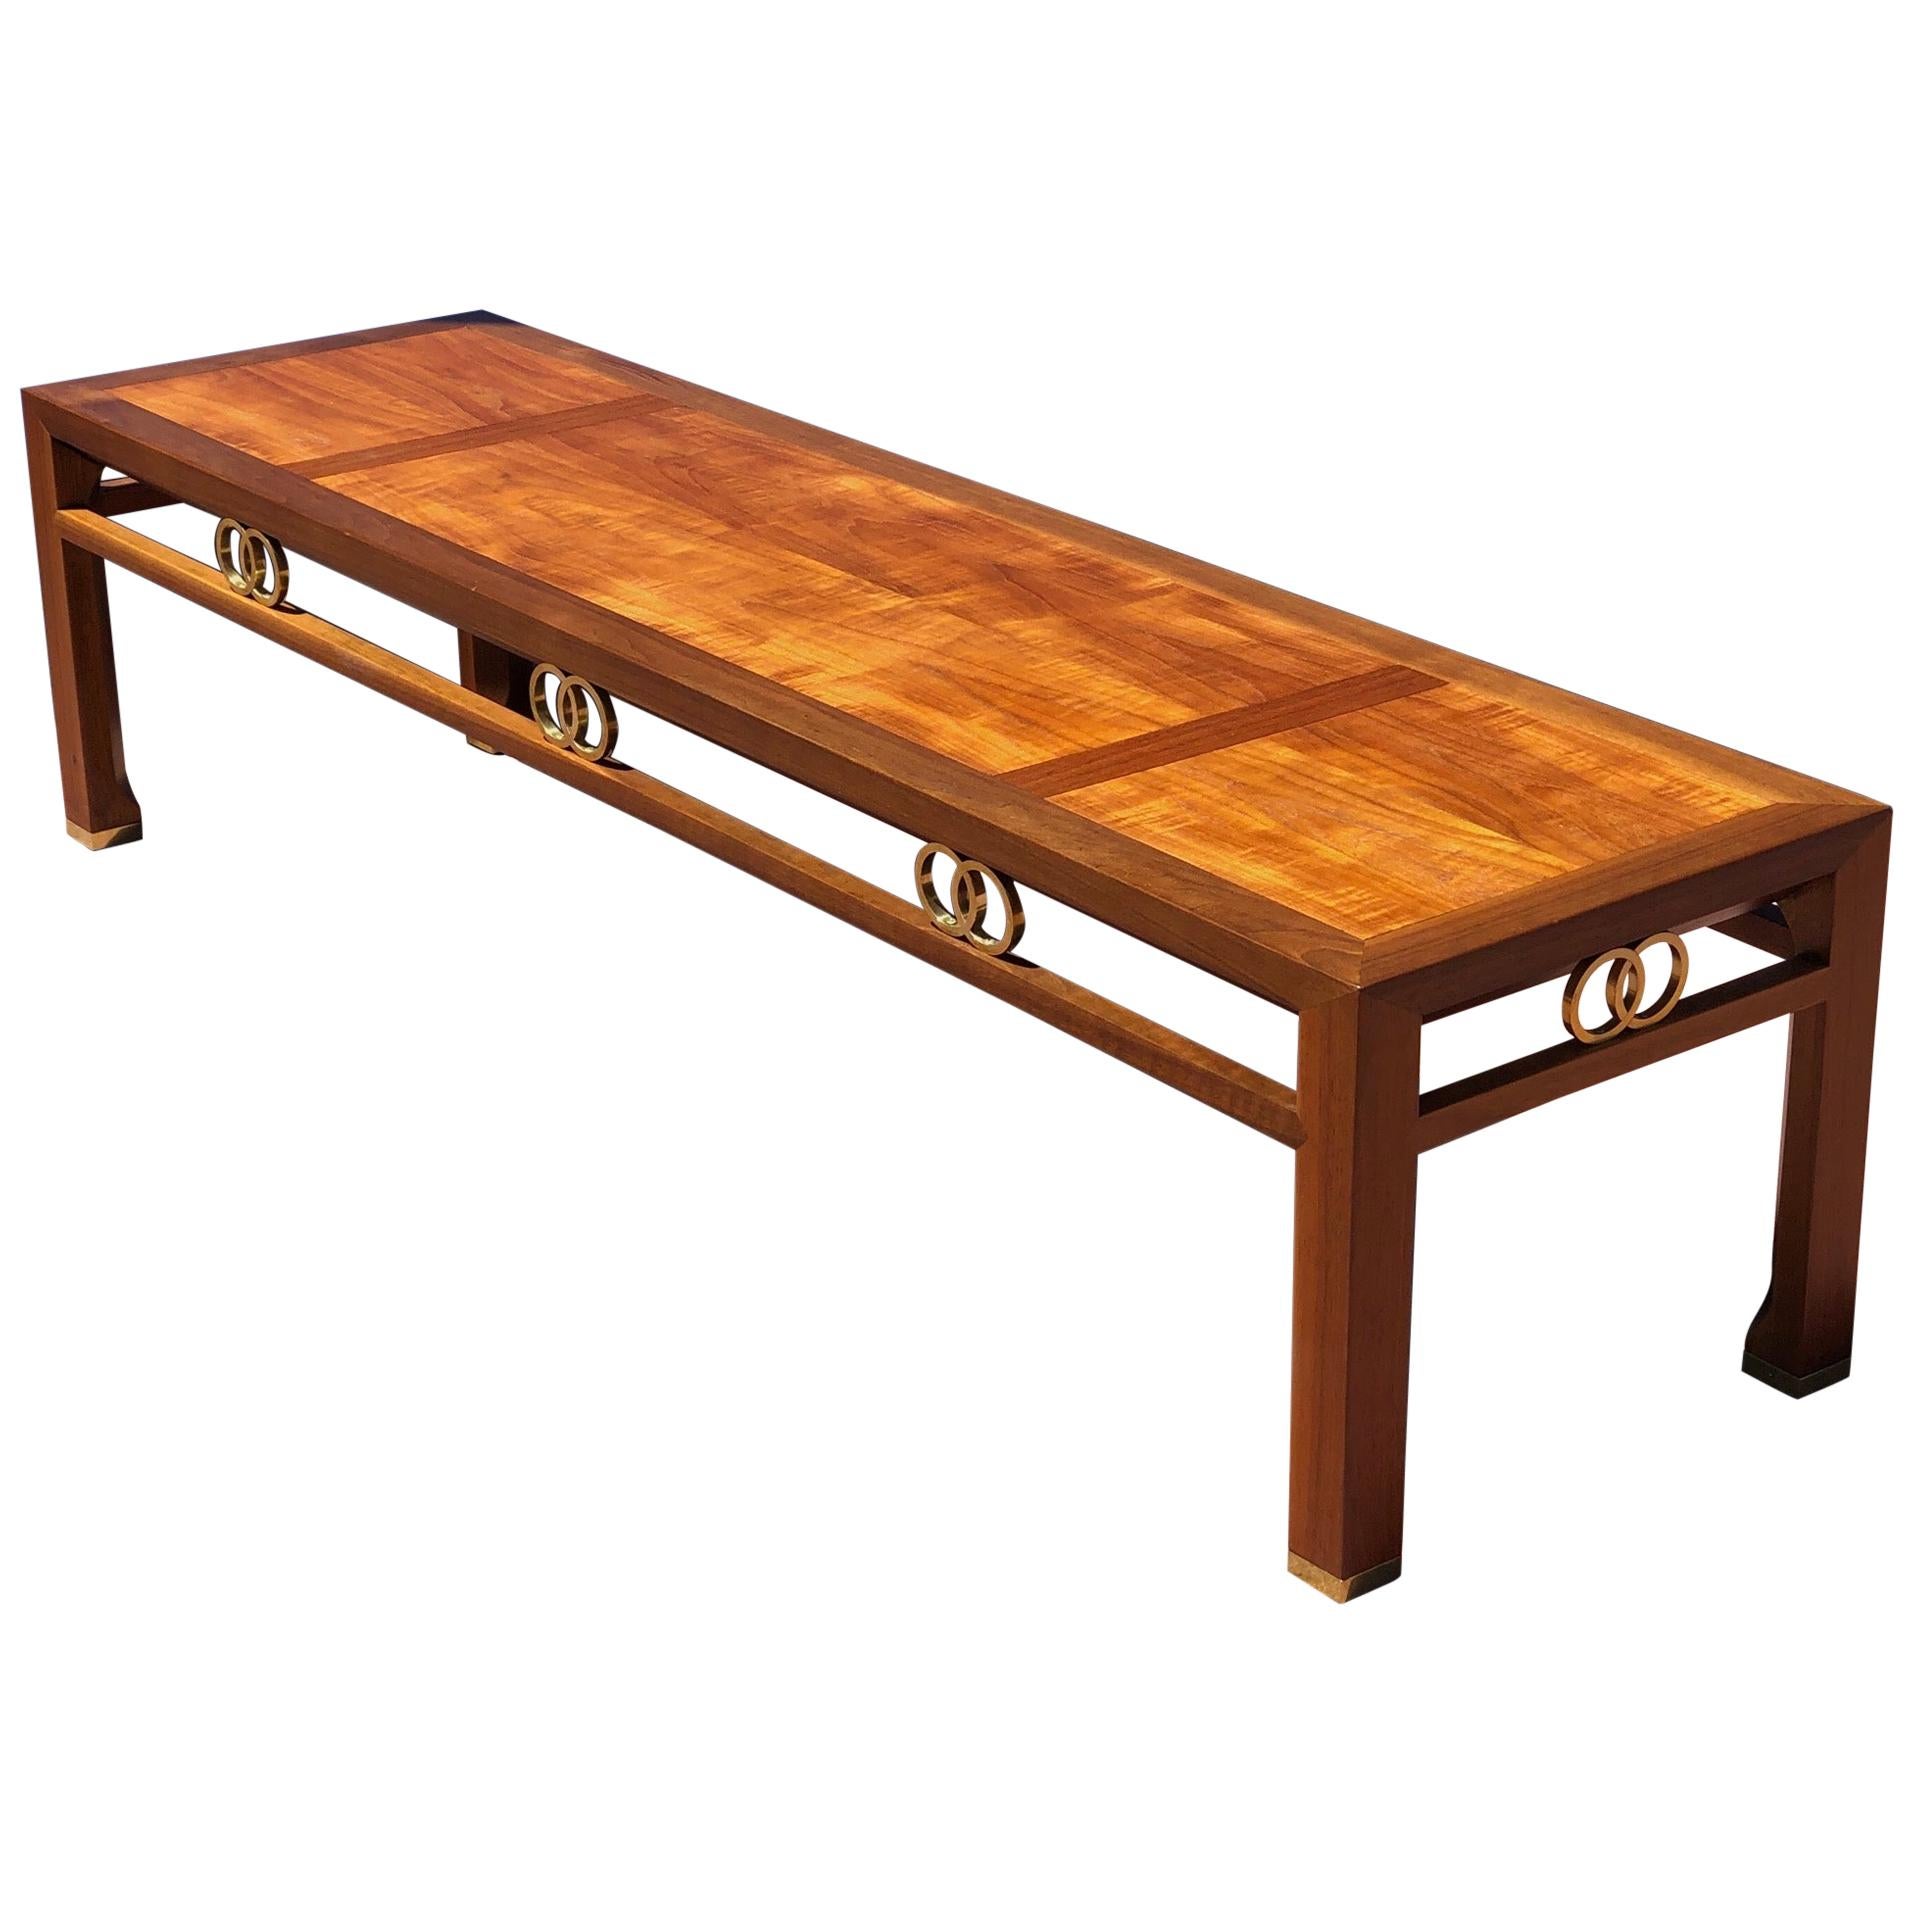 Elegant Long Coffee Table / Bench by Baker with Brass Accents